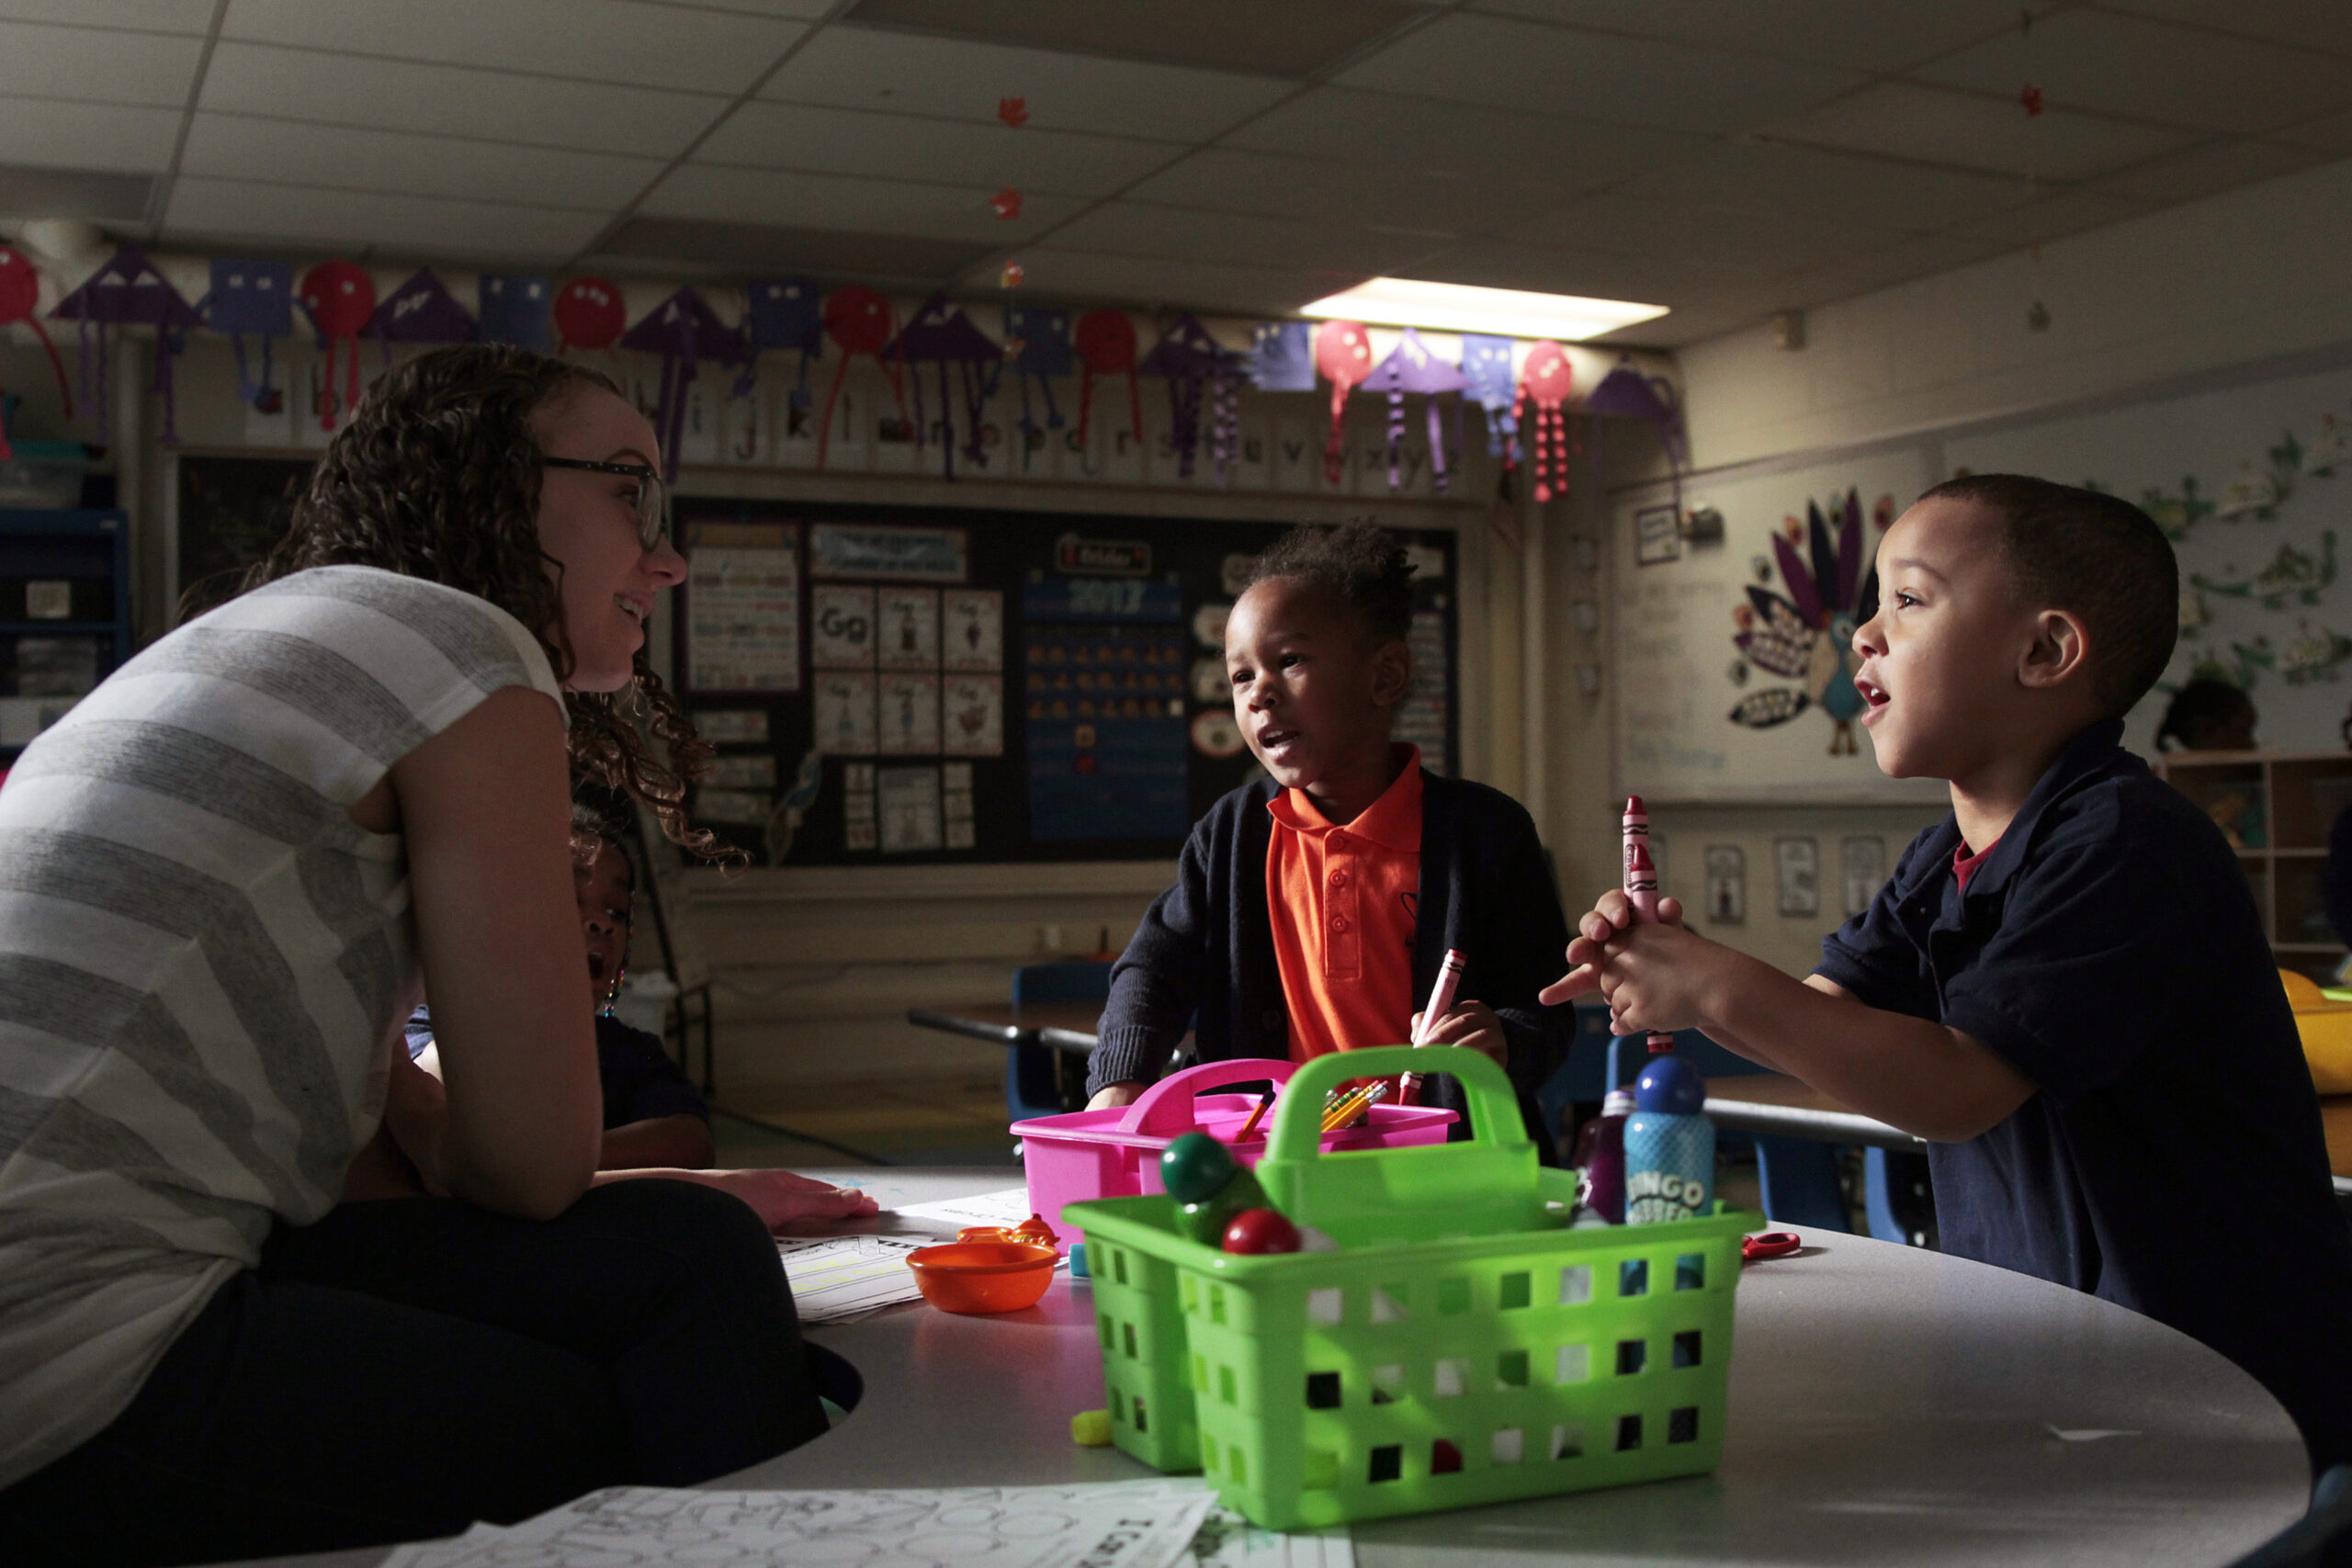 Two K-4 students speak with a teacher at a classroom table